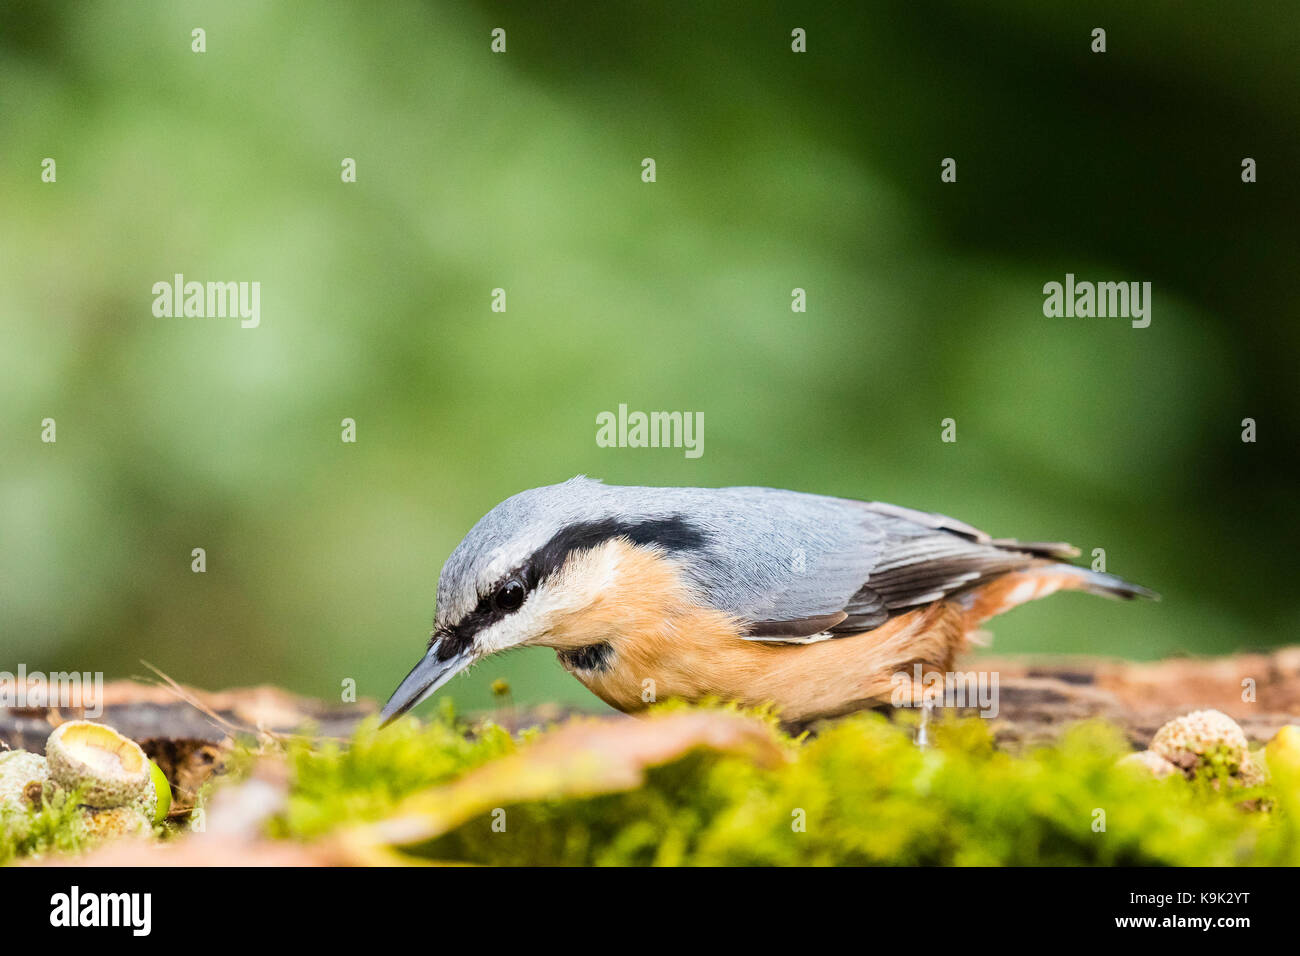 Blaenpennal, Ceredigion, Wales, UK. September 23 2017. European nuthatch foraging for food in early autumn, Wales. Credit Phil Jones/Alamay Live New s Stock Photo